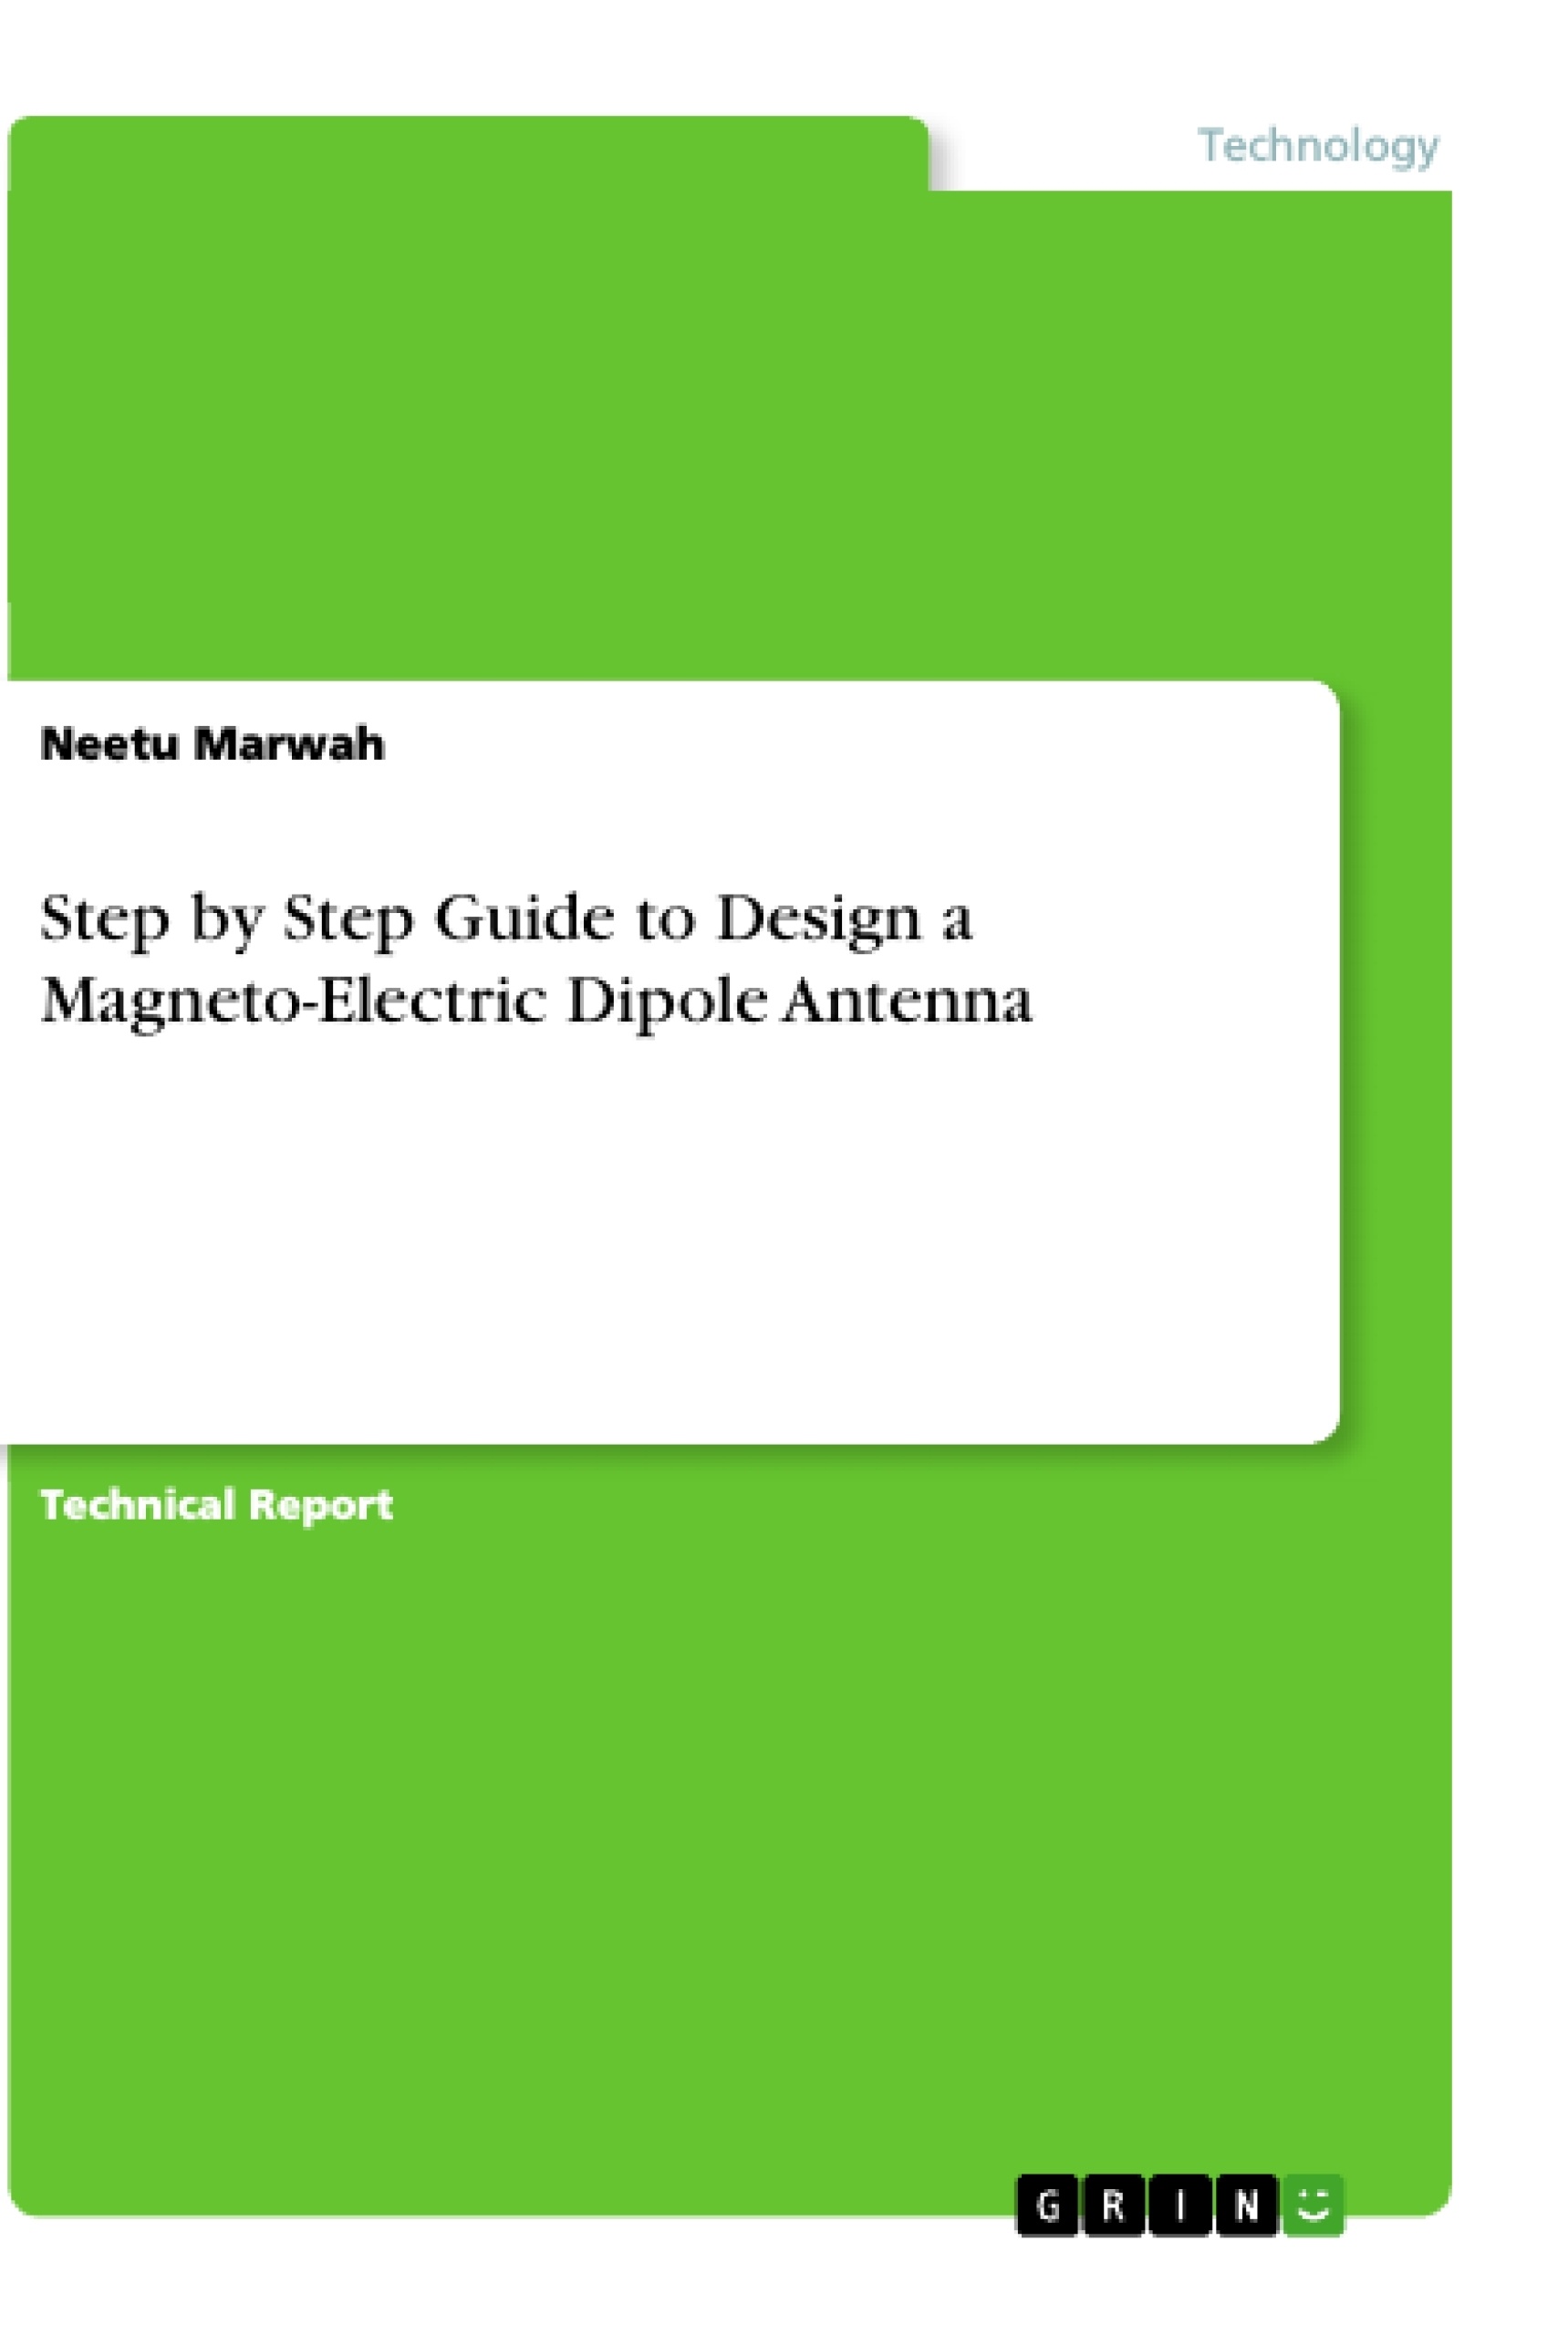 Titel: Step by Step Guide to Design a Magneto-Electric Dipole Antenna